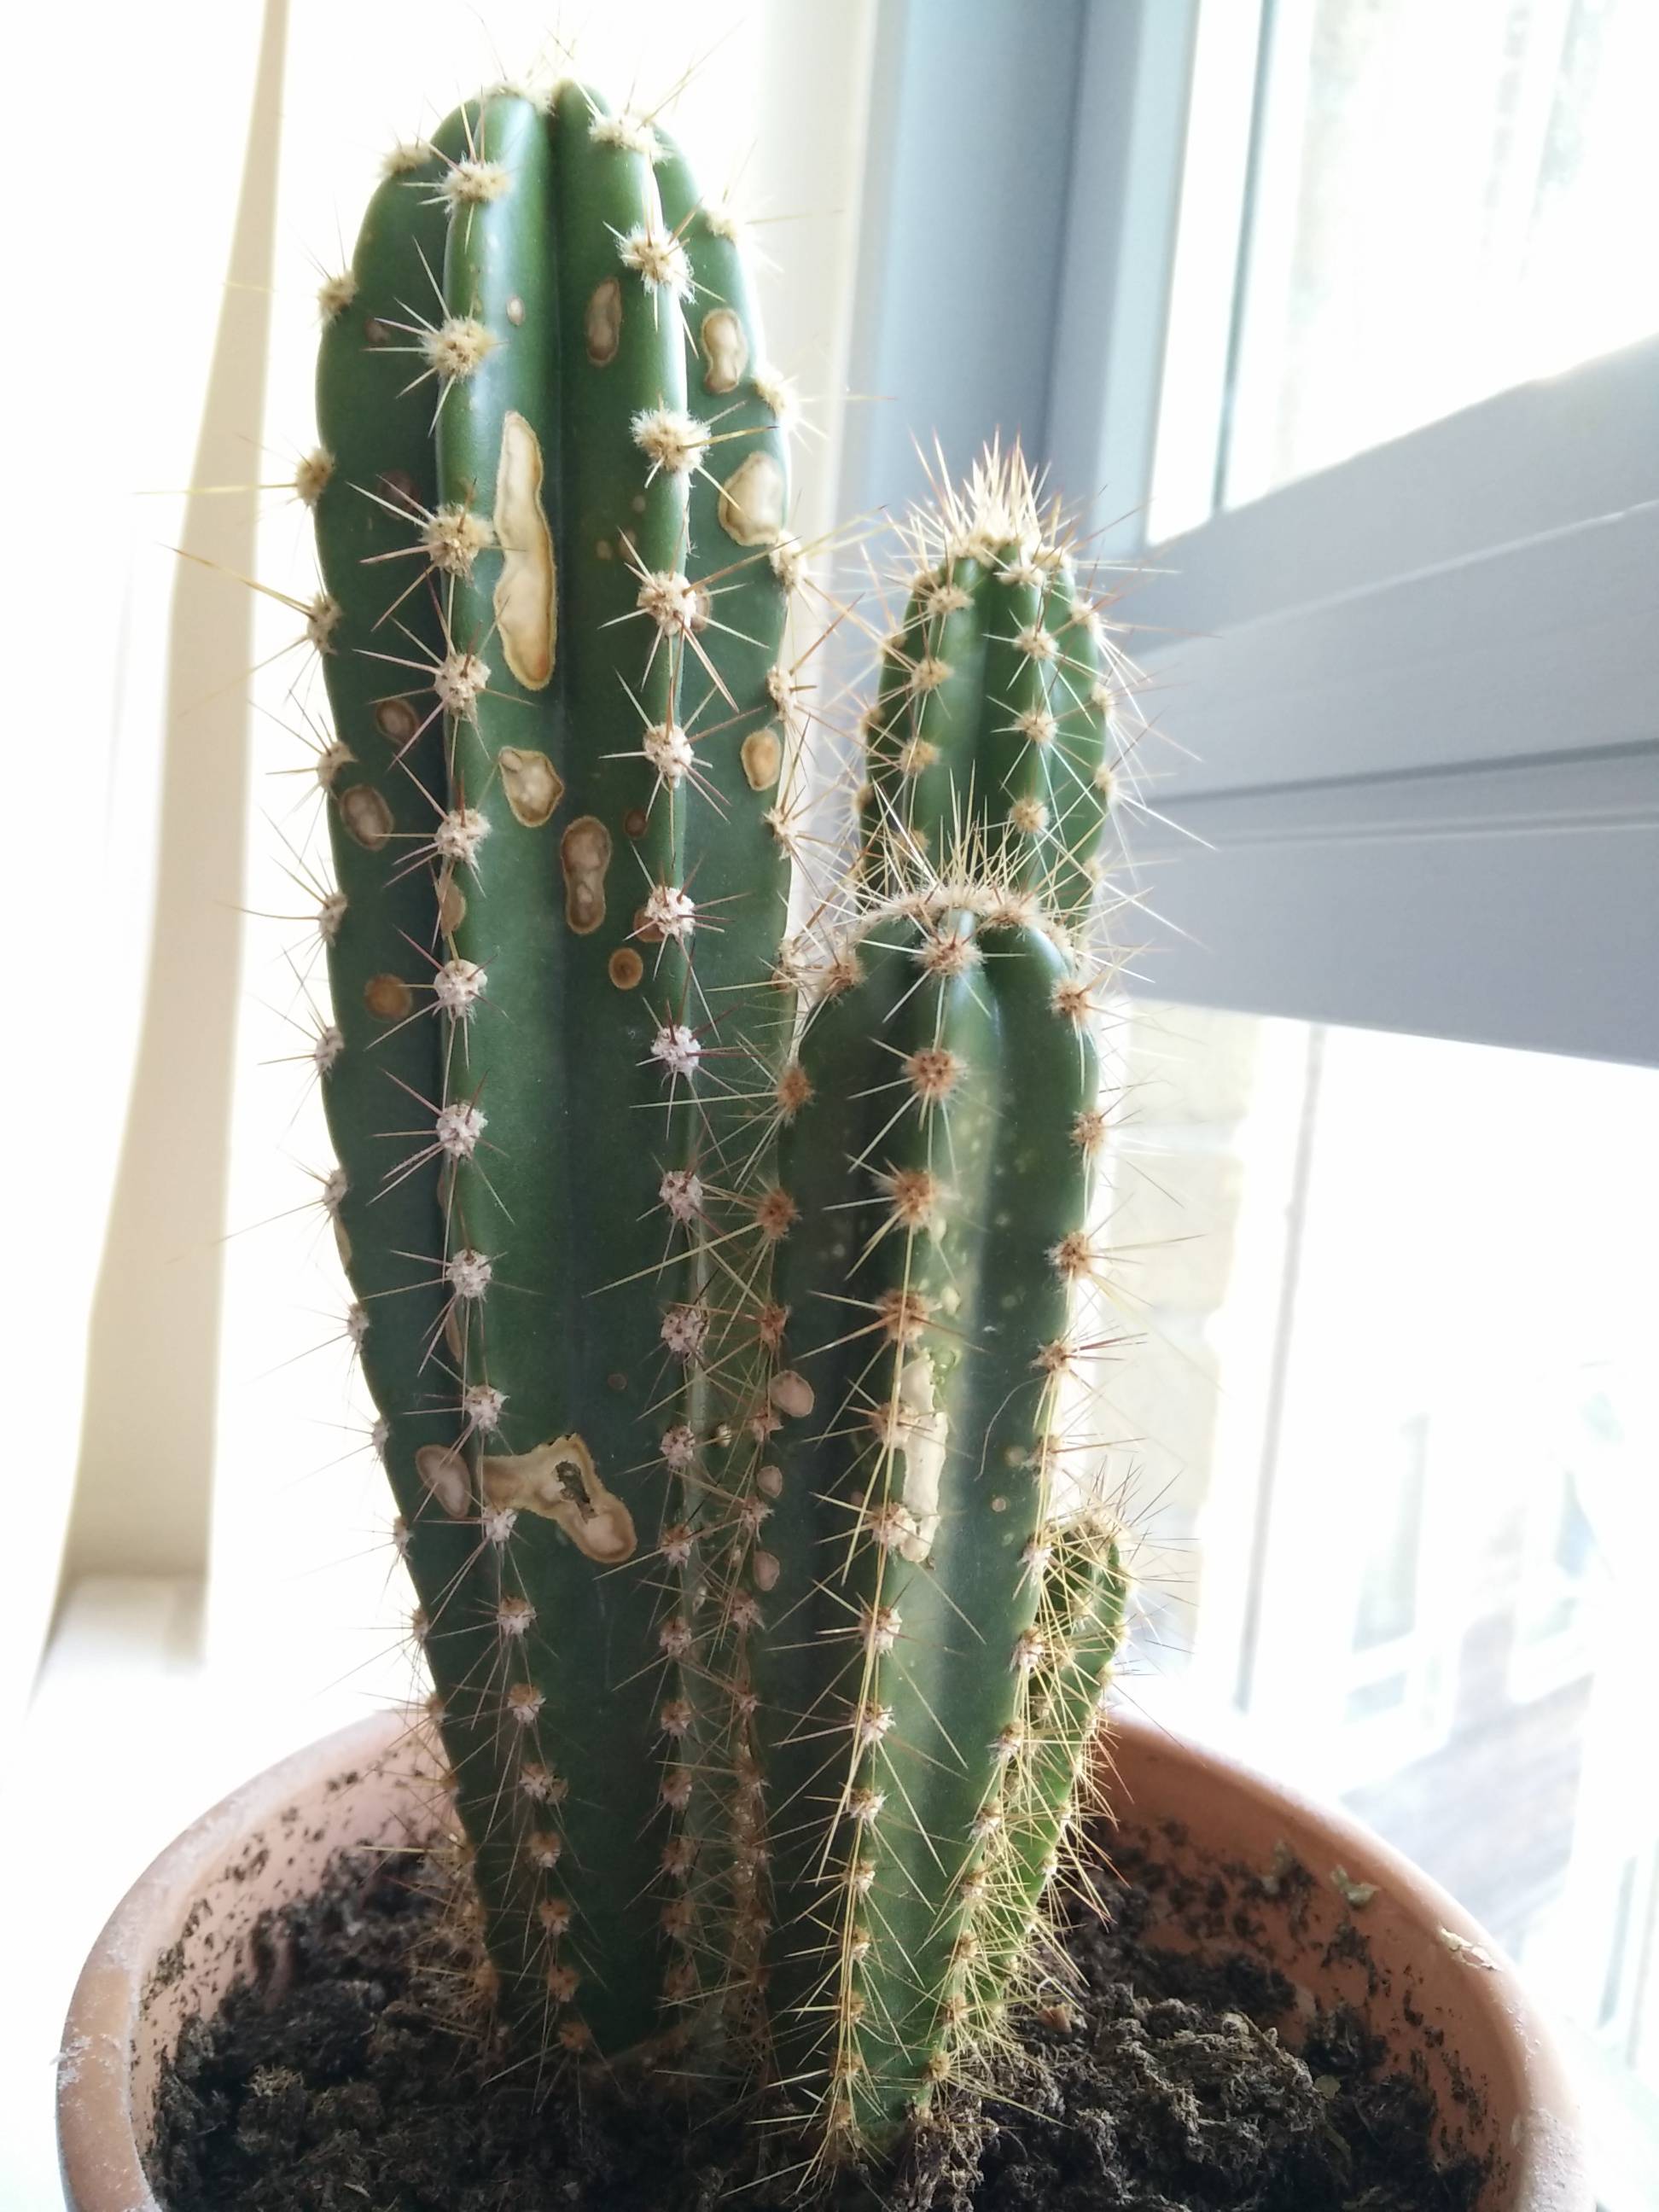 What are these brown spots on my cactus? - Gardening & Landscaping ...